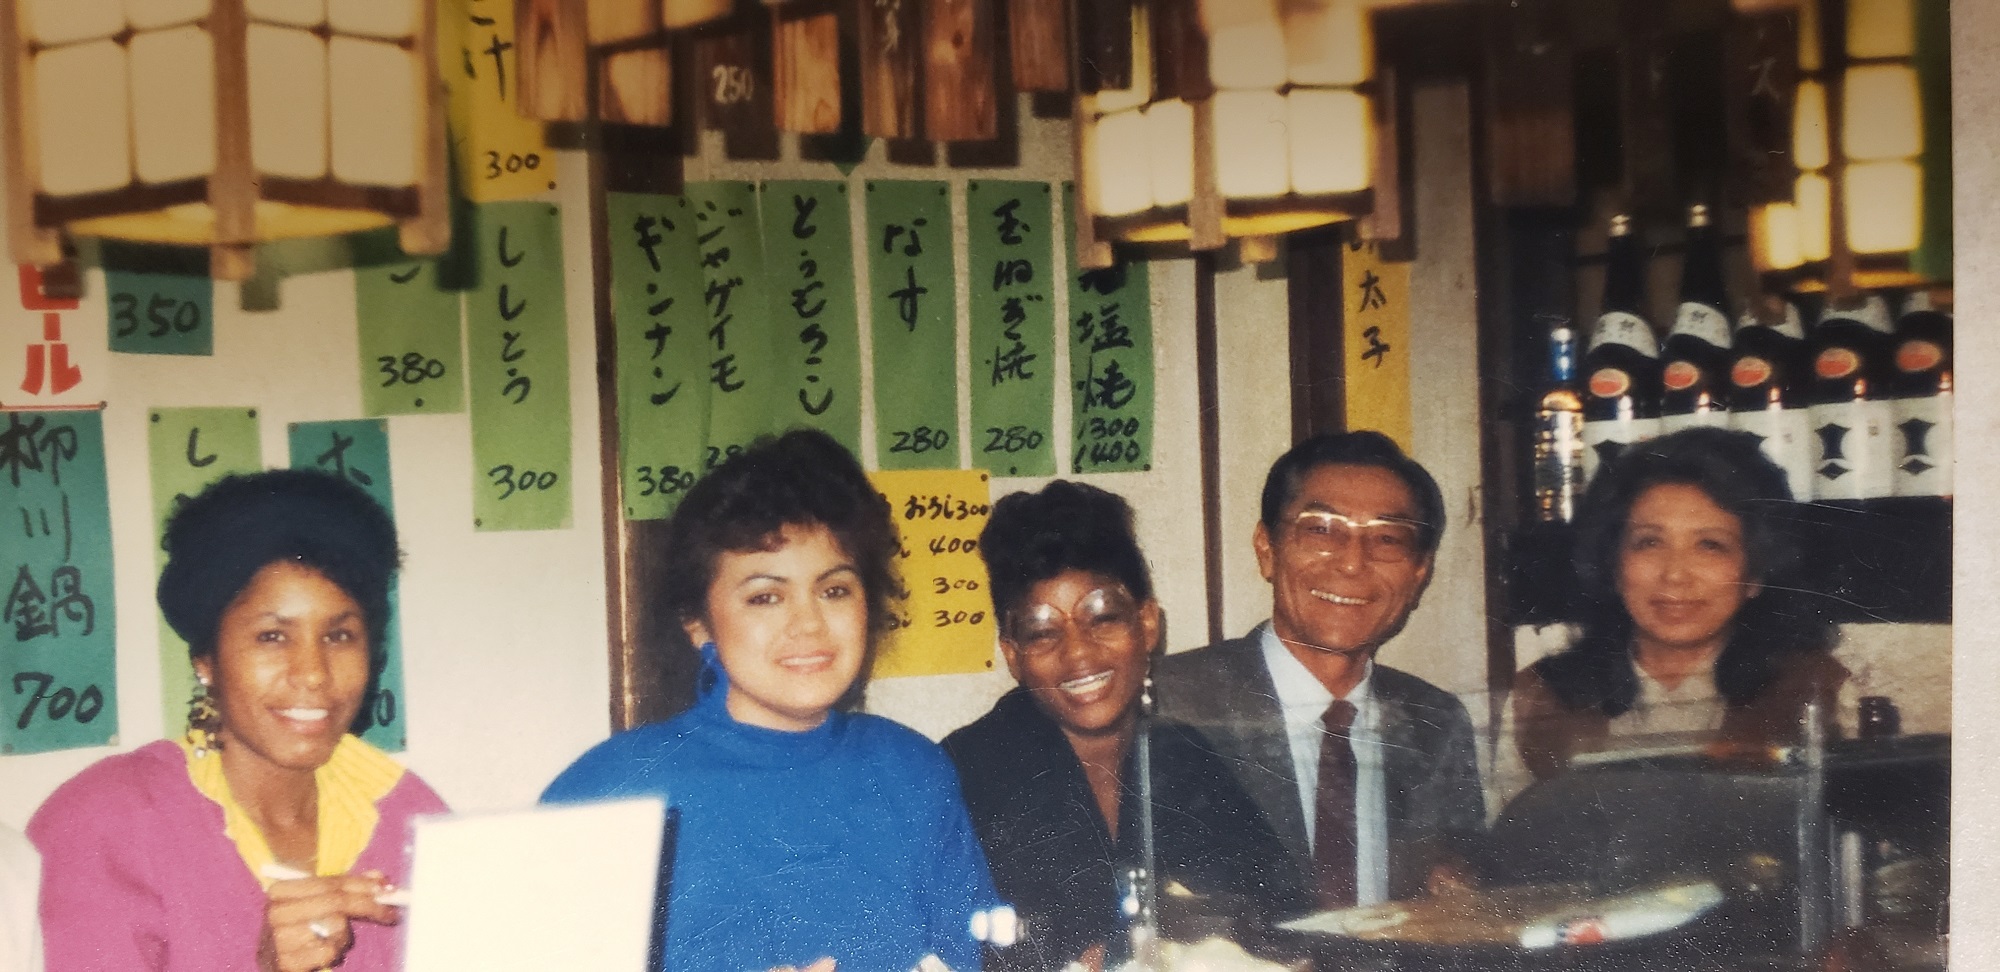 Lorre McNeal Saylor (middle) having dinner in Japan. (Courtesy of Lorrie McNeal Saylor)